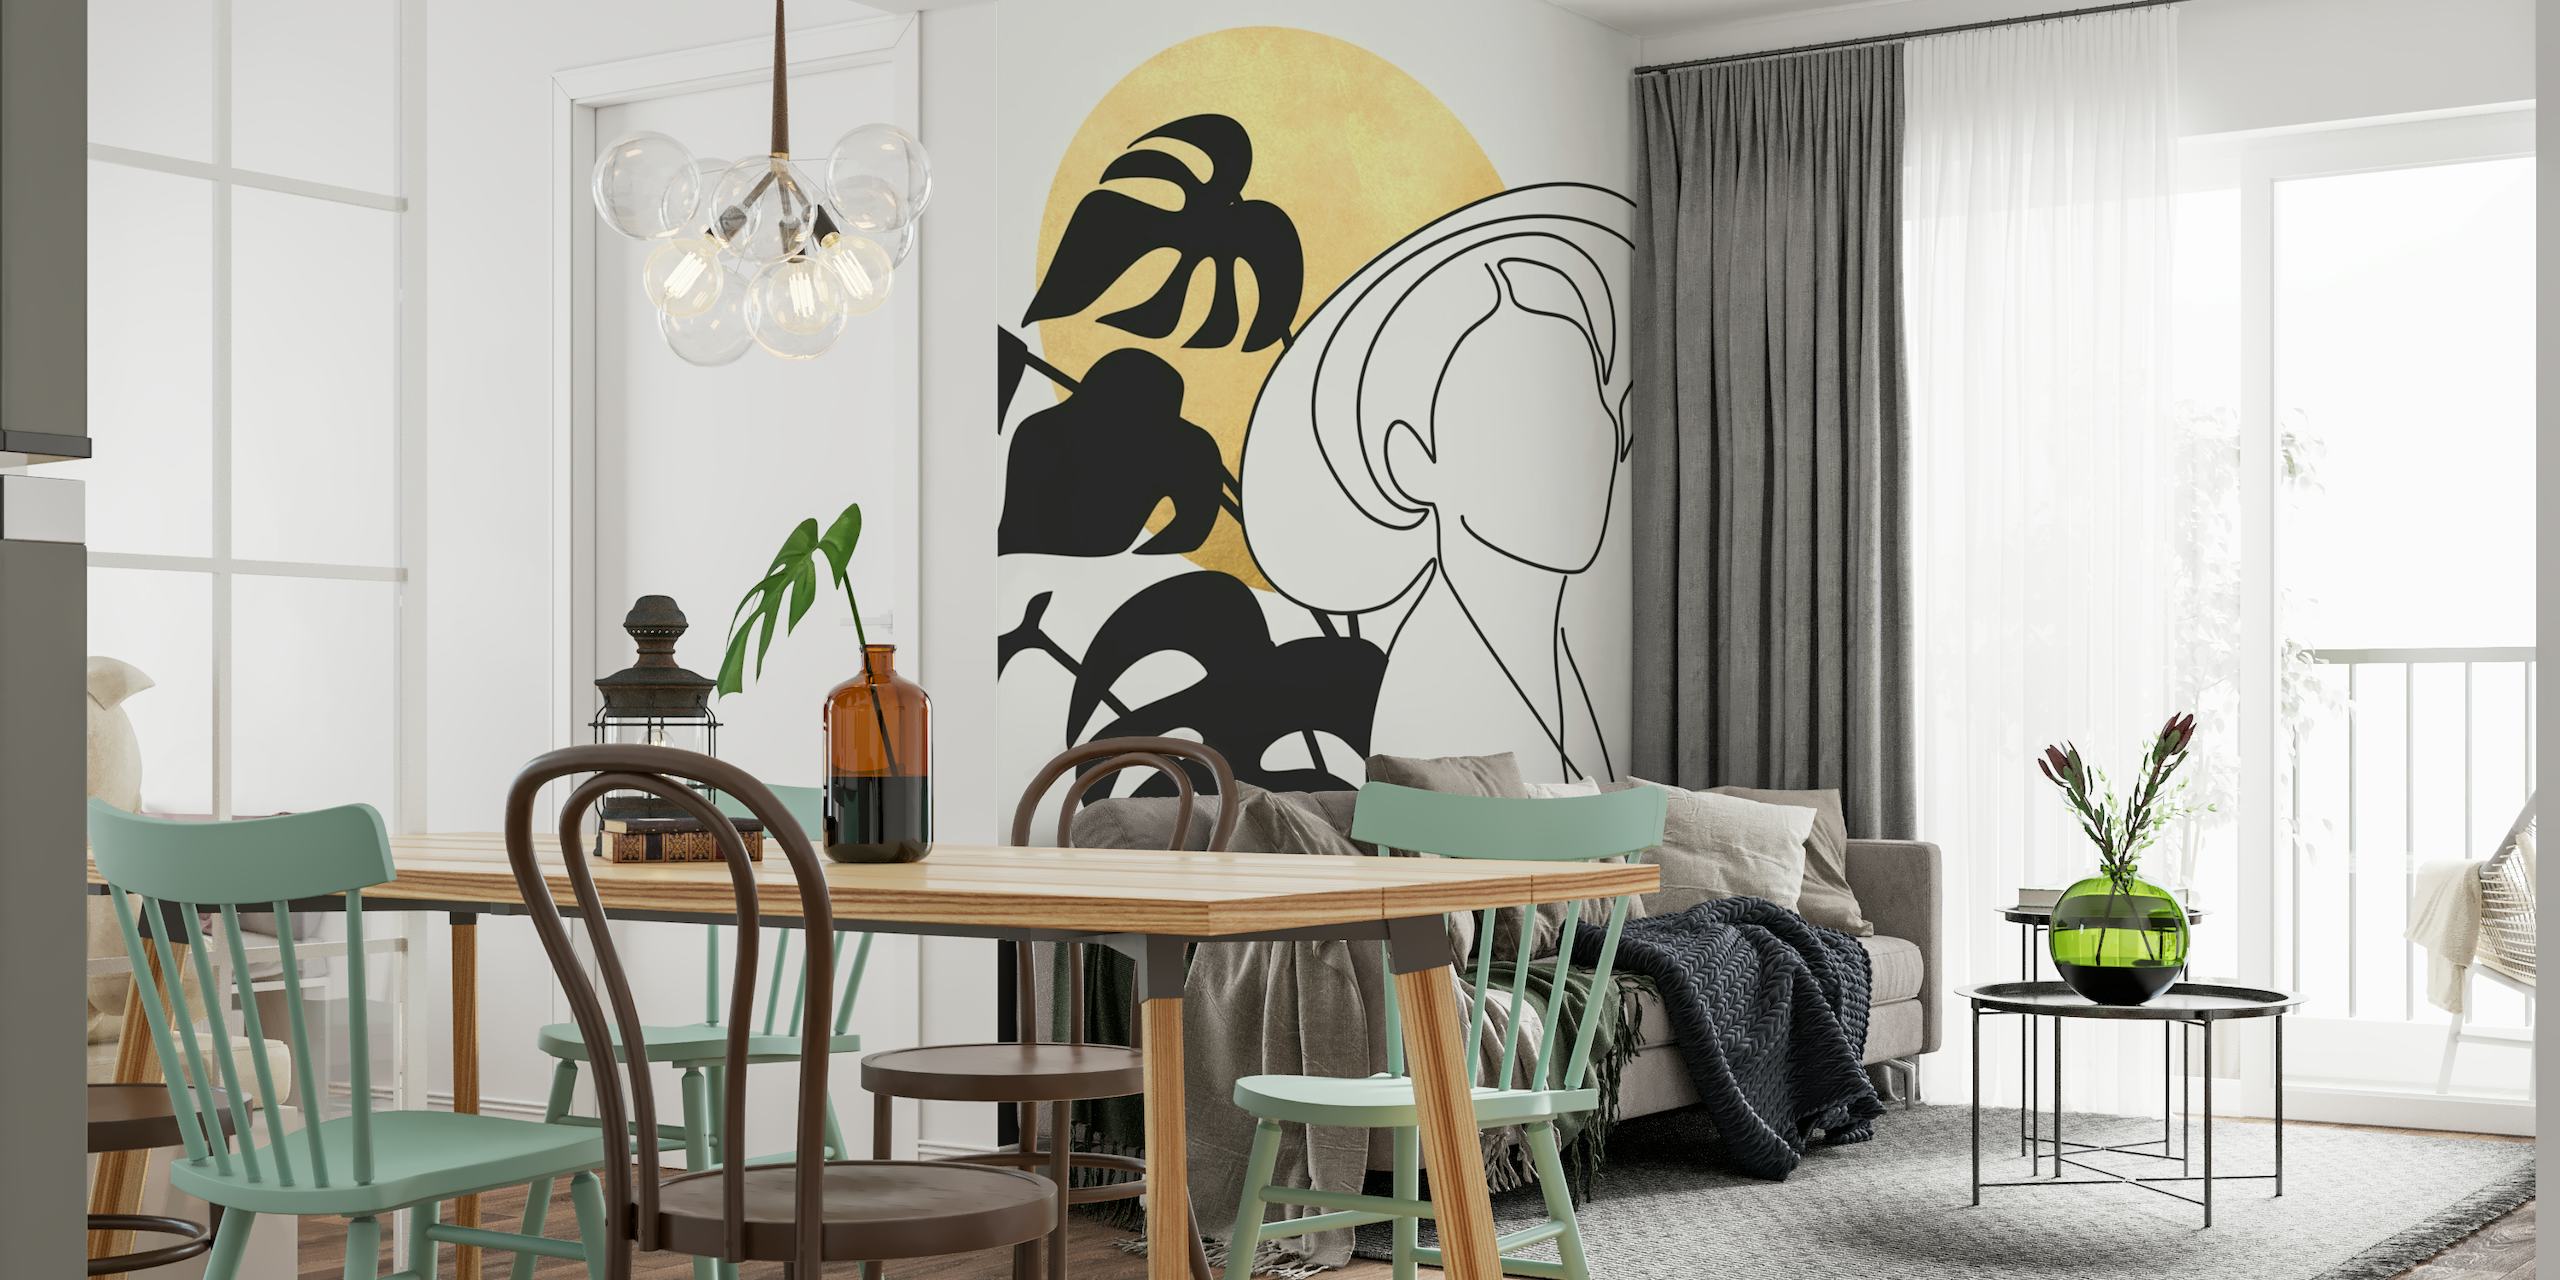 Monochrome silhouette wall mural with golden sun and foliage detail